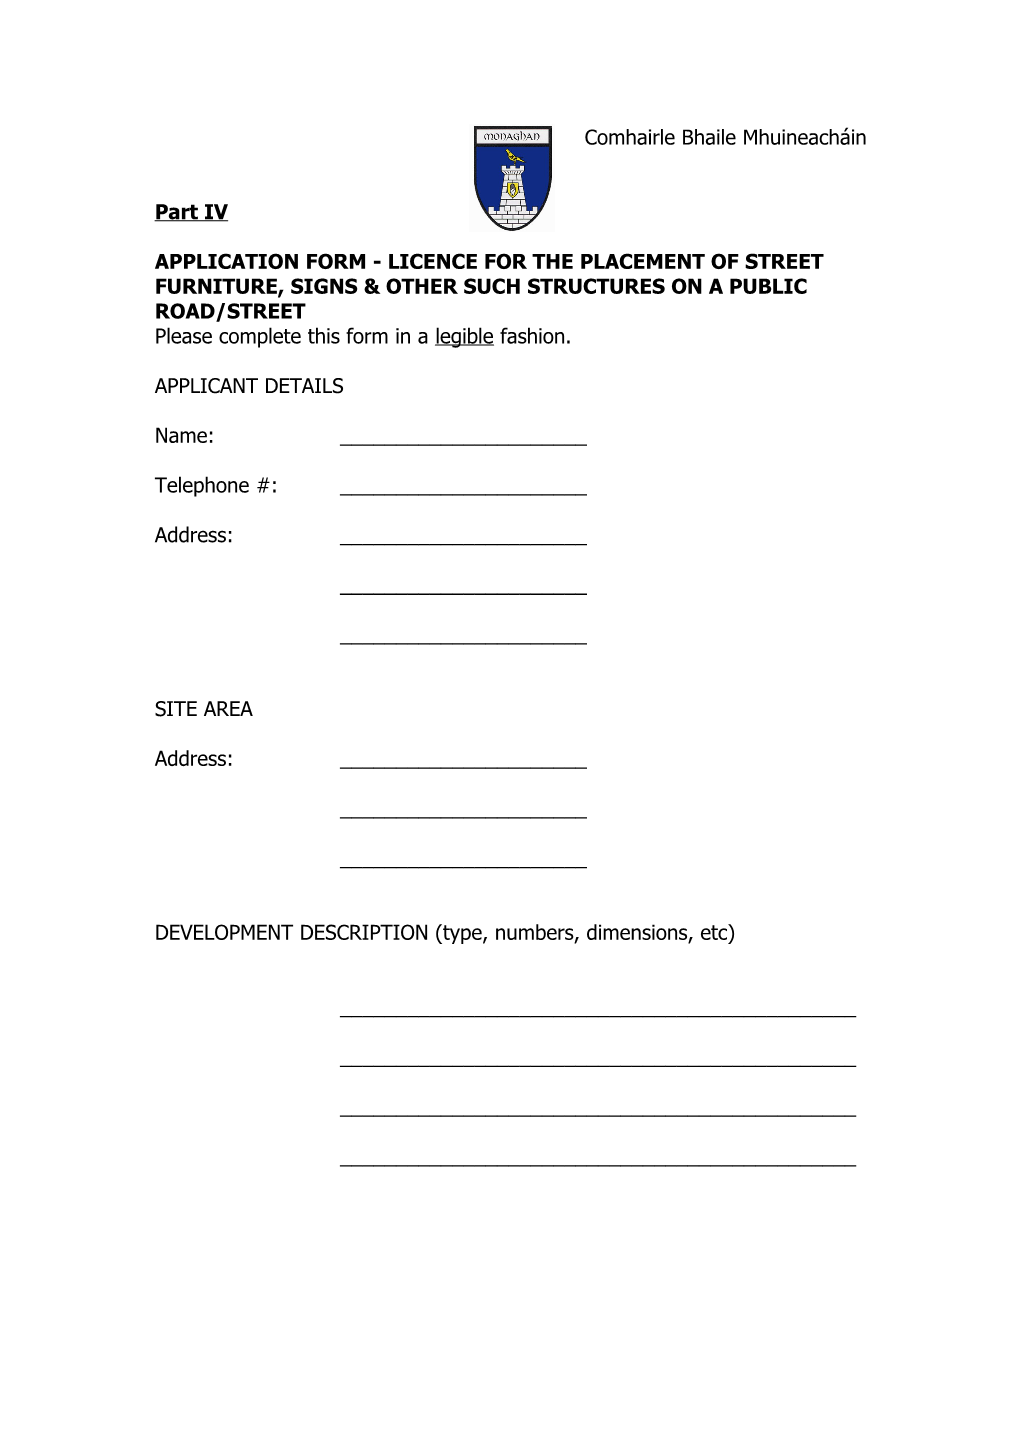 Please Complete This Form in a Legible Fashion